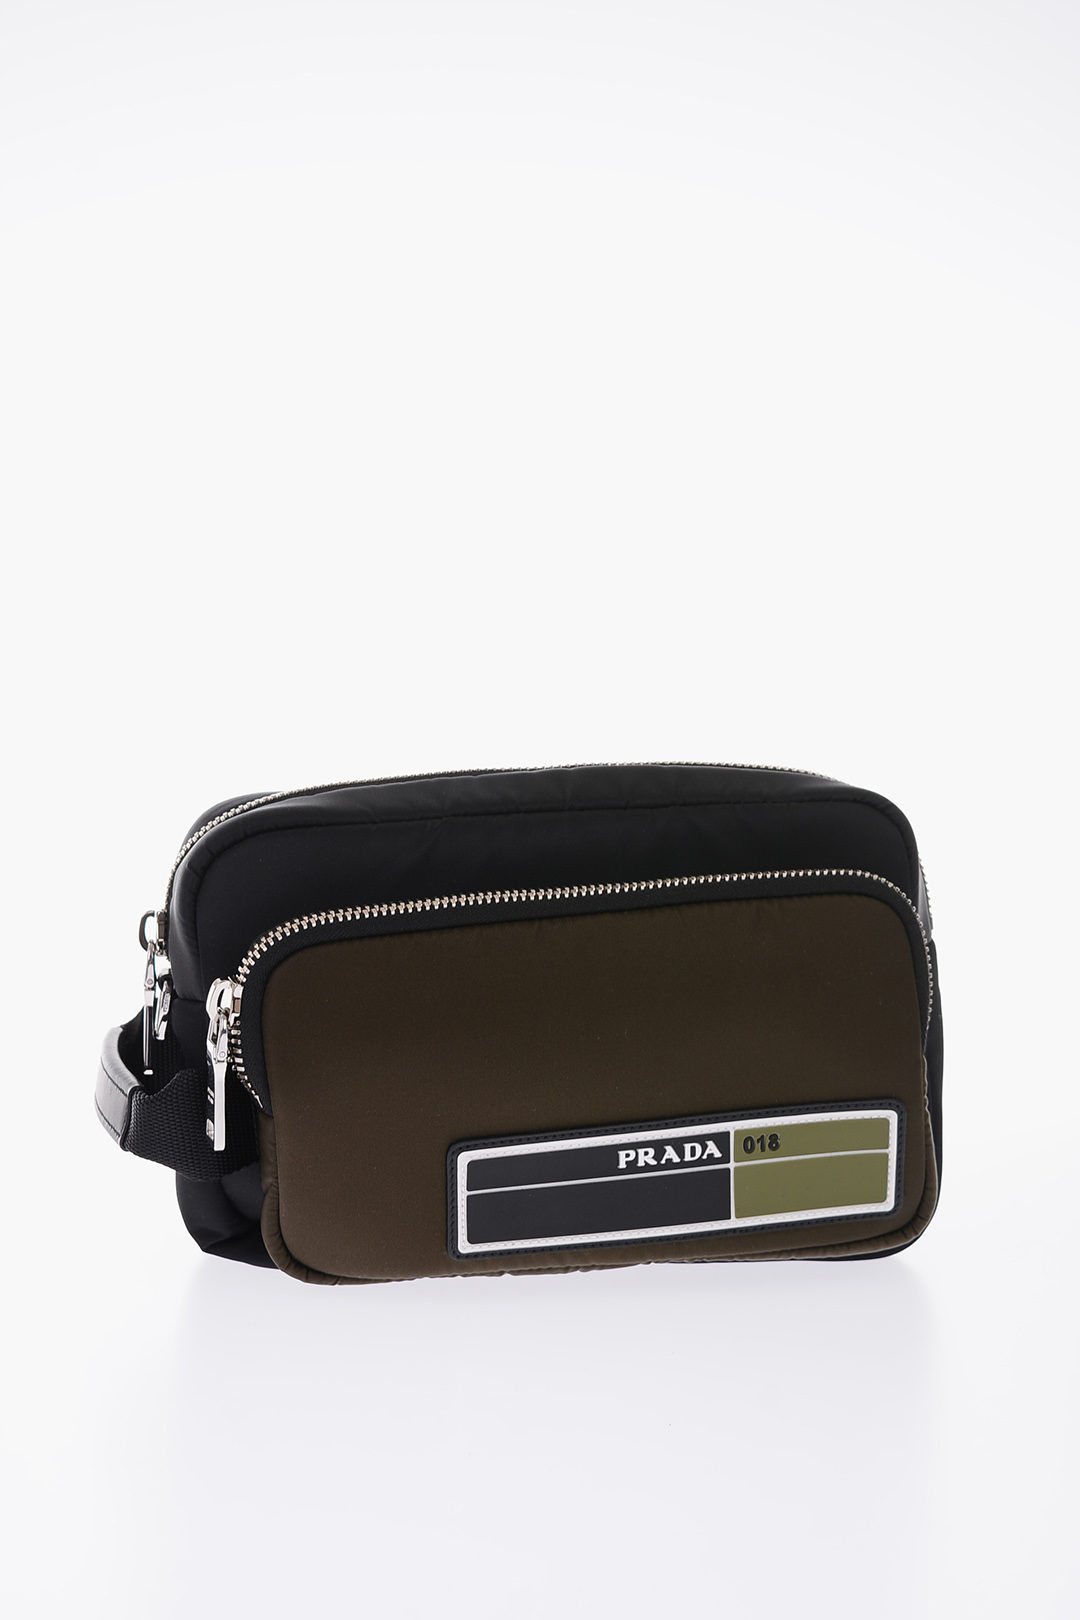 Prada Fabric Toiletry bag with Zip Closure men - Glamood Outlet